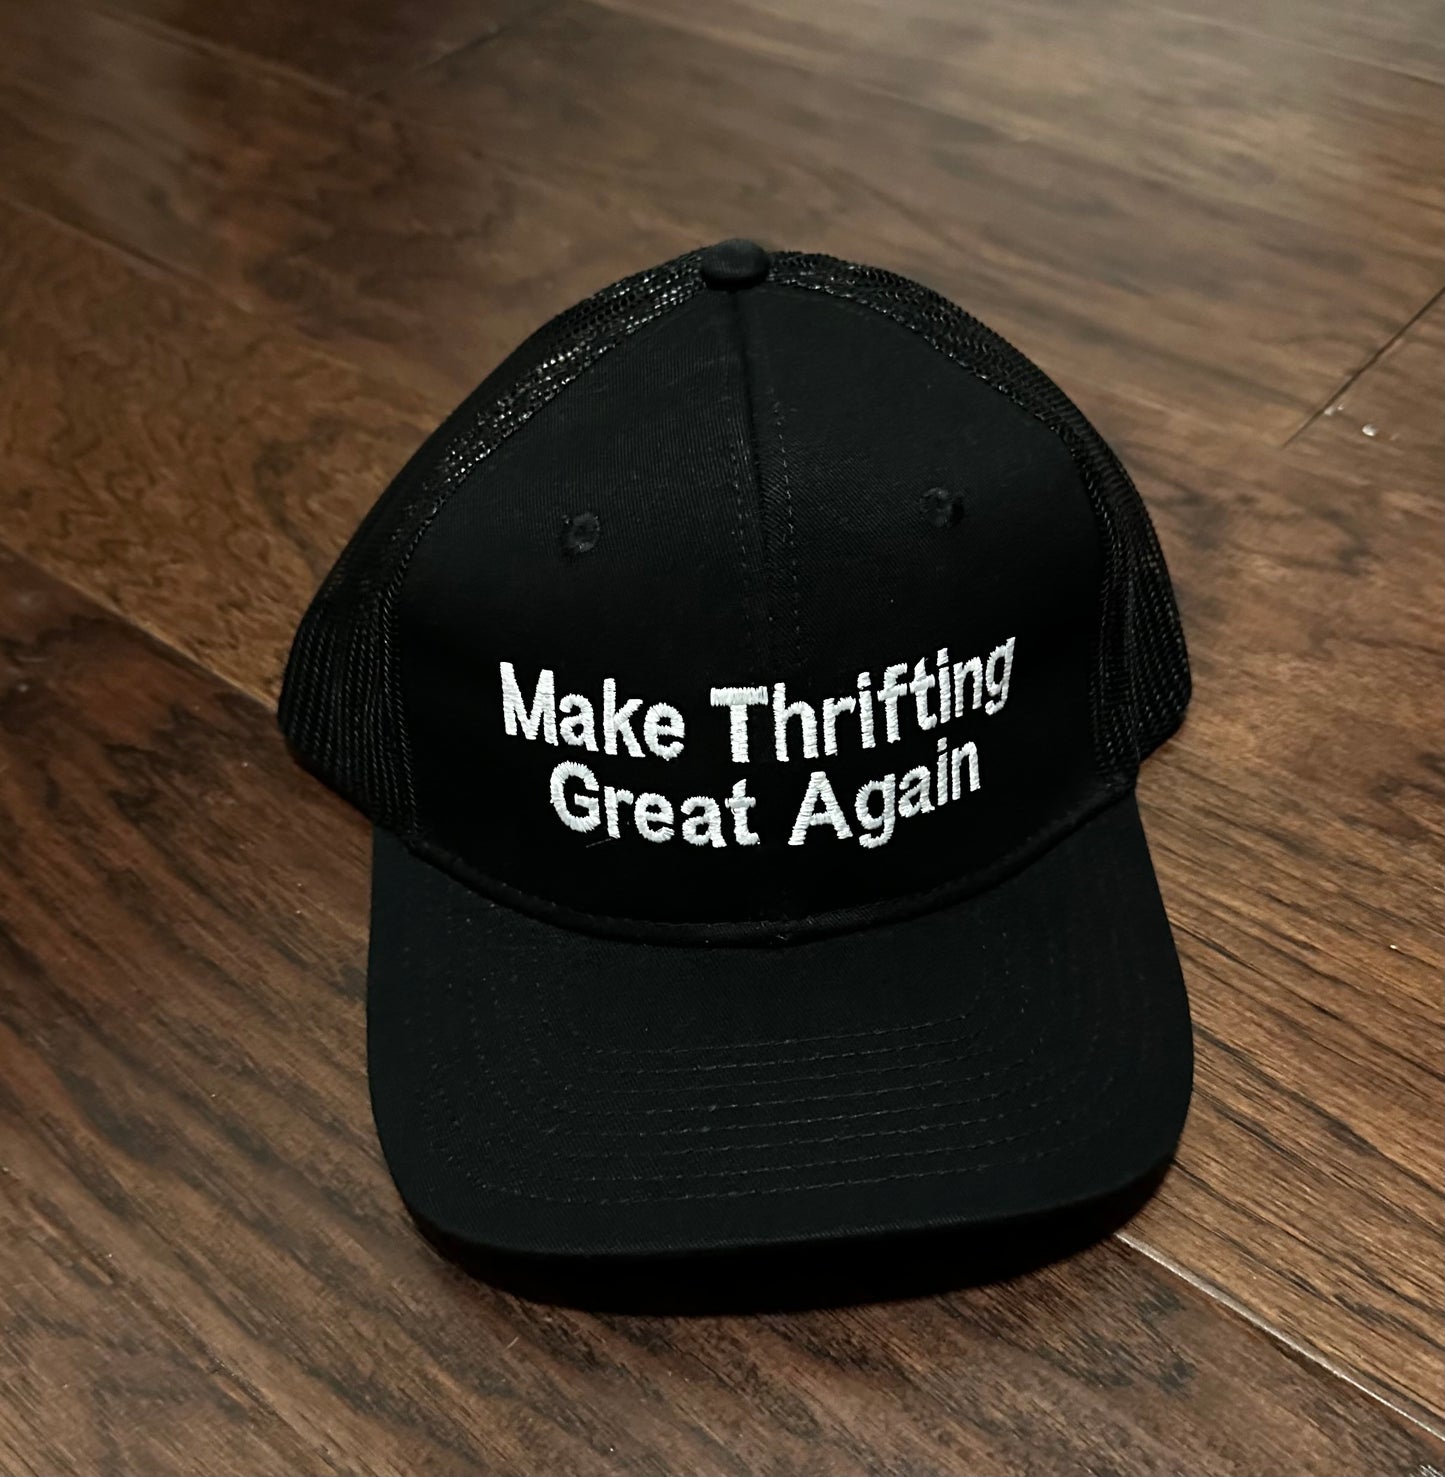 WFindThrift Hat - Make Thrifting great again